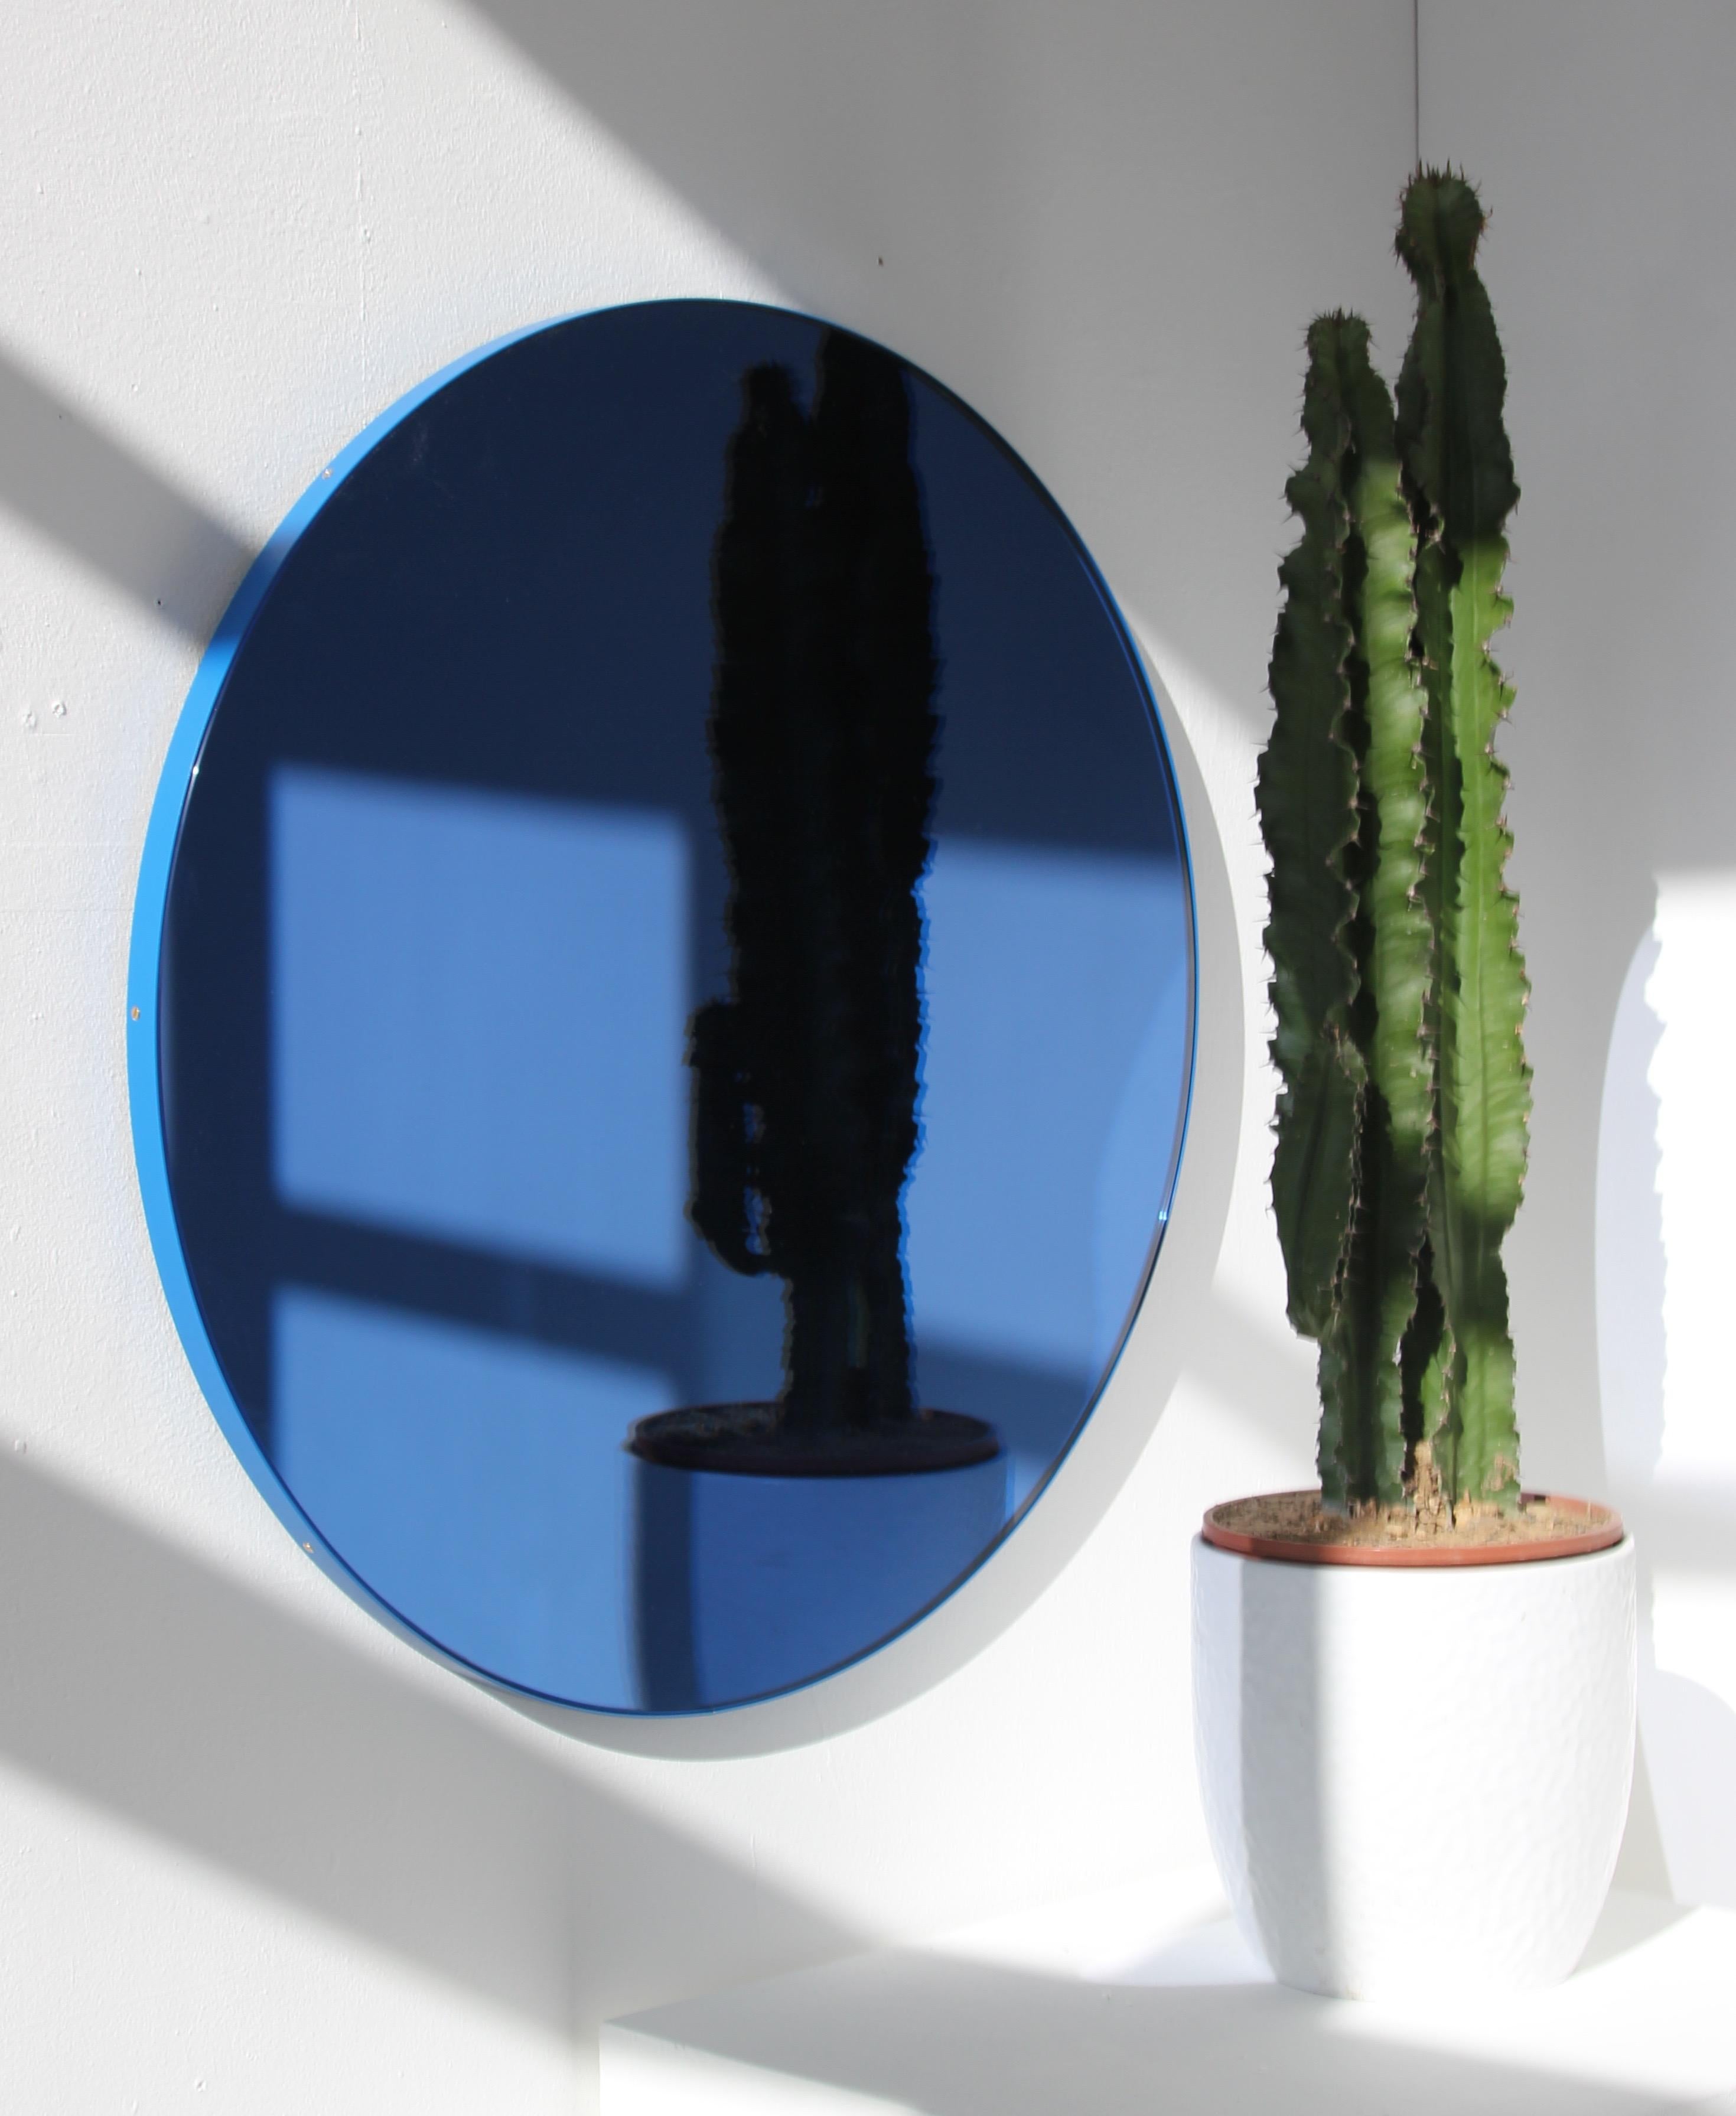 Contemporary blue tinted round mirror with an aluminium powder coated blue frame. Designed and hand-crafted in London, UK.

Medium, large and extra-large mirrors (60, 80 and 100cm) are fitted with an ingenious French cleat (split batten) system so